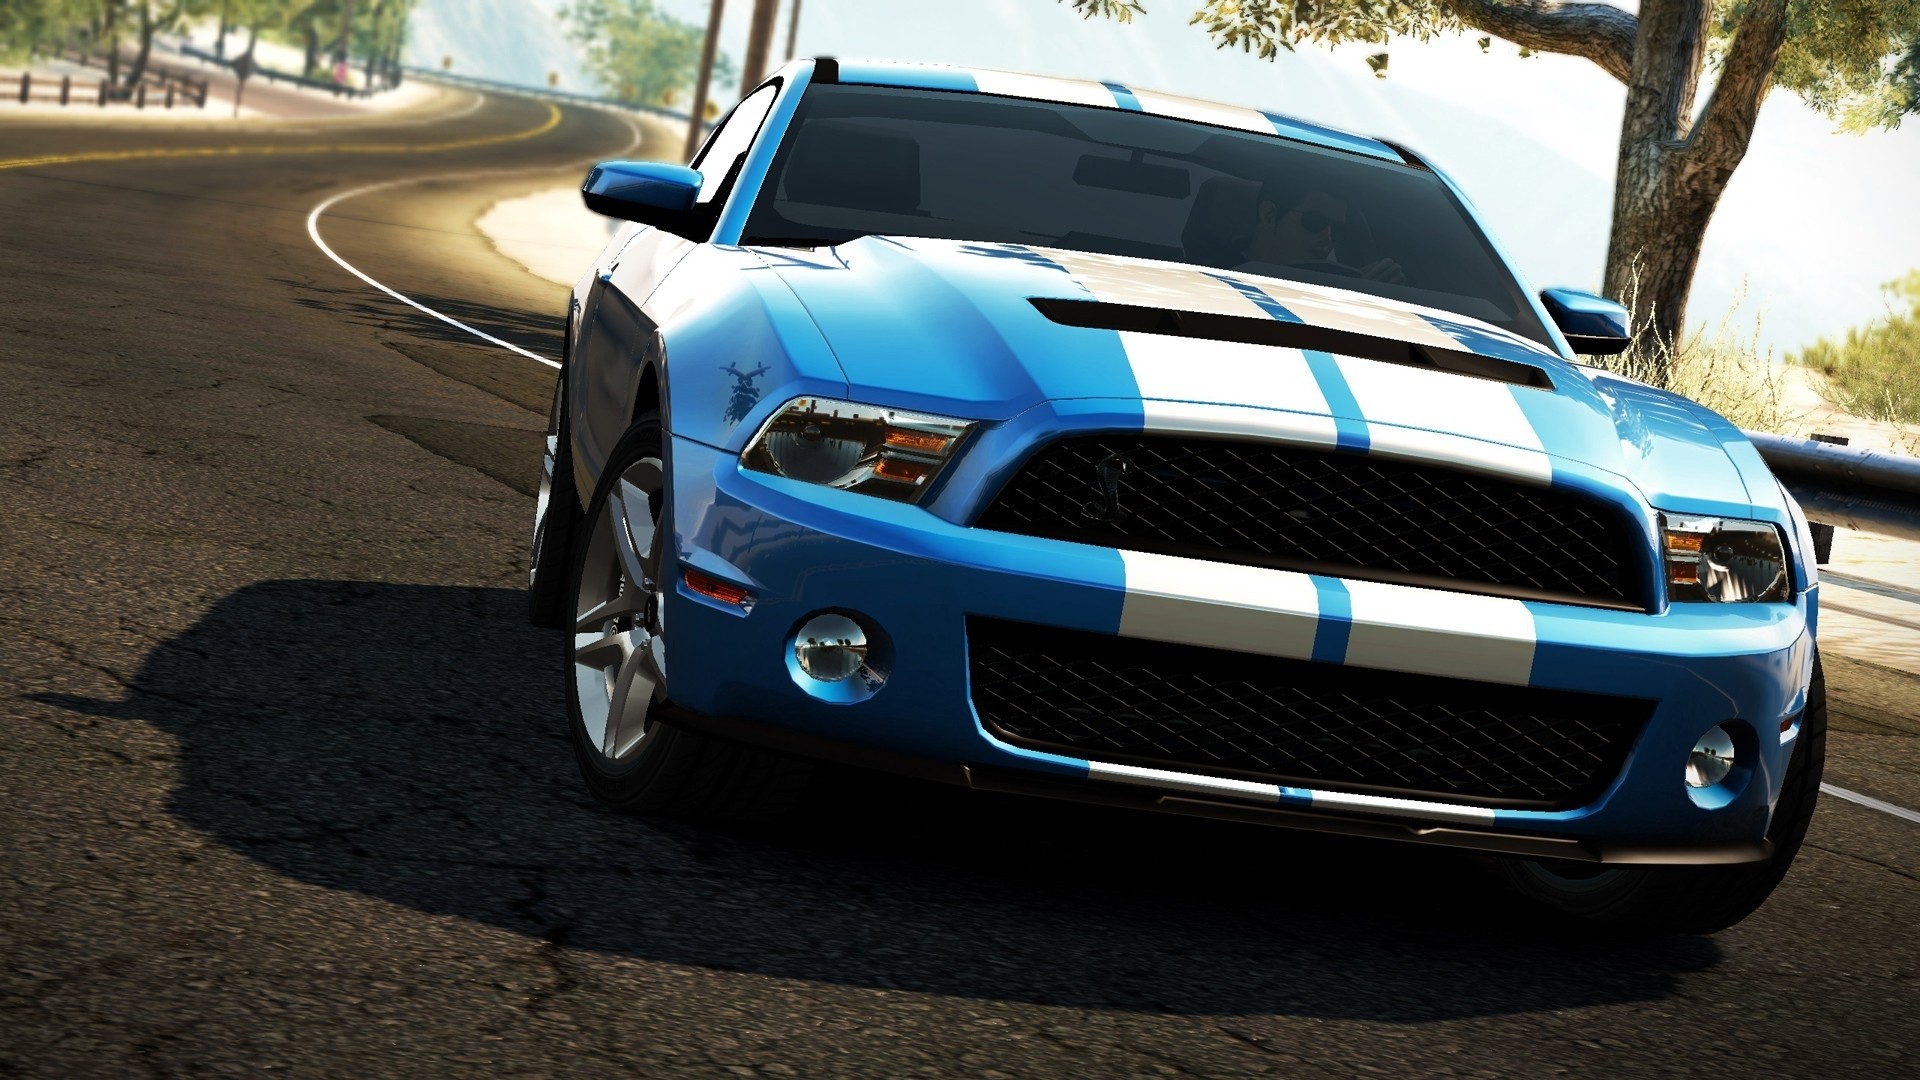 General 1920x1080 car Ford vehicle blue cars road Ford Mustang racing stripes American cars muscle cars